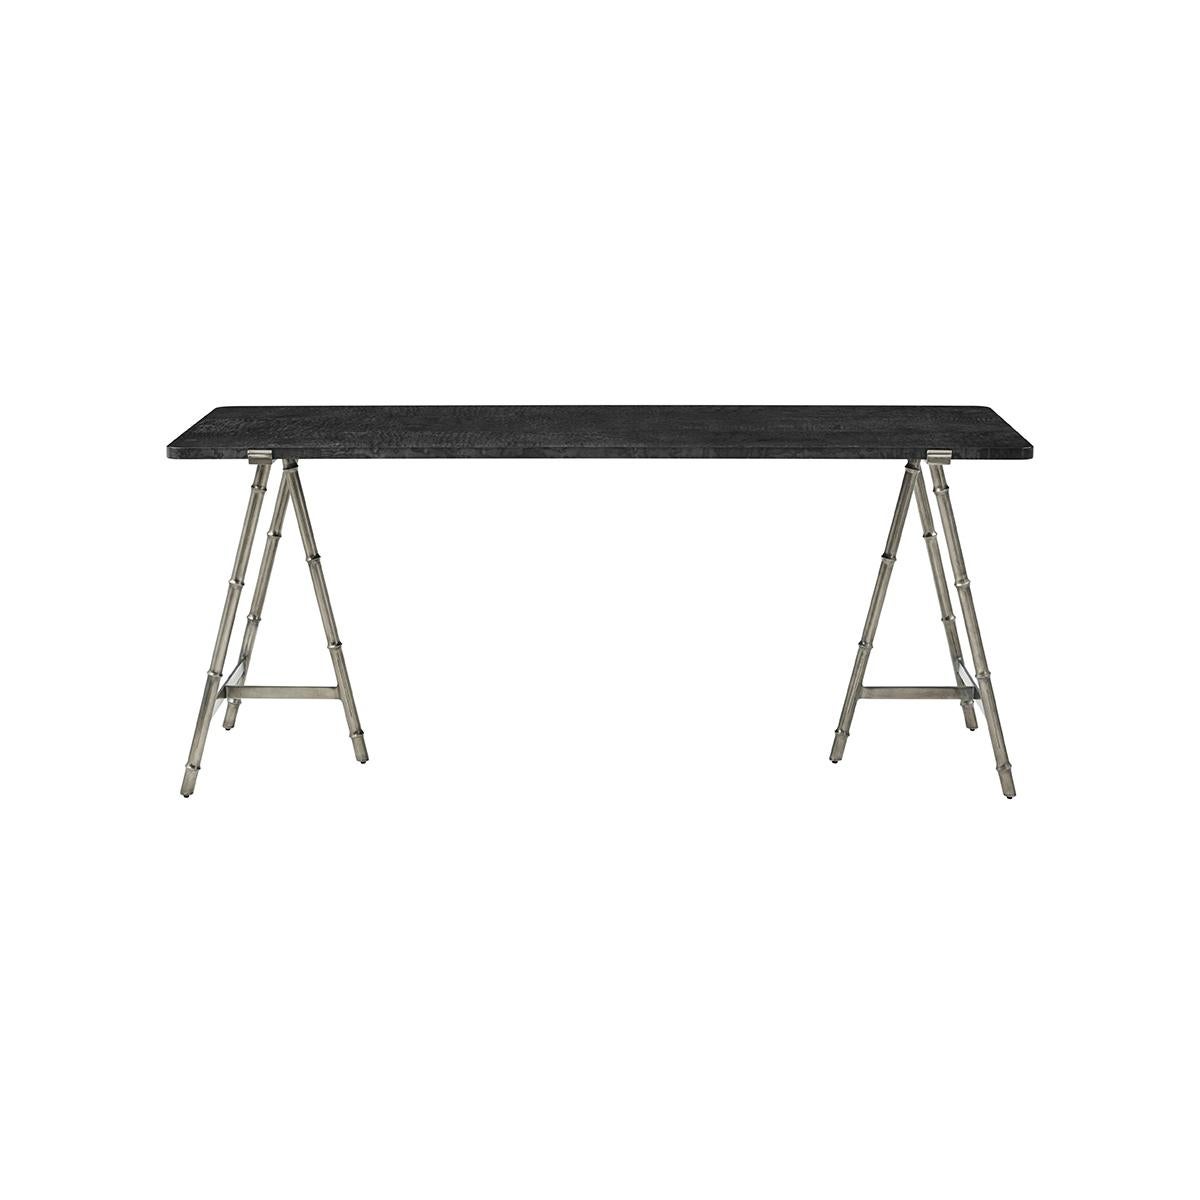 Slender lines form a light and airy design in this modern table. A graceful combination of burl wood in a silent black polished finish atop an organic faux bois base in a silvered bronze finish.

Dimensions: 72